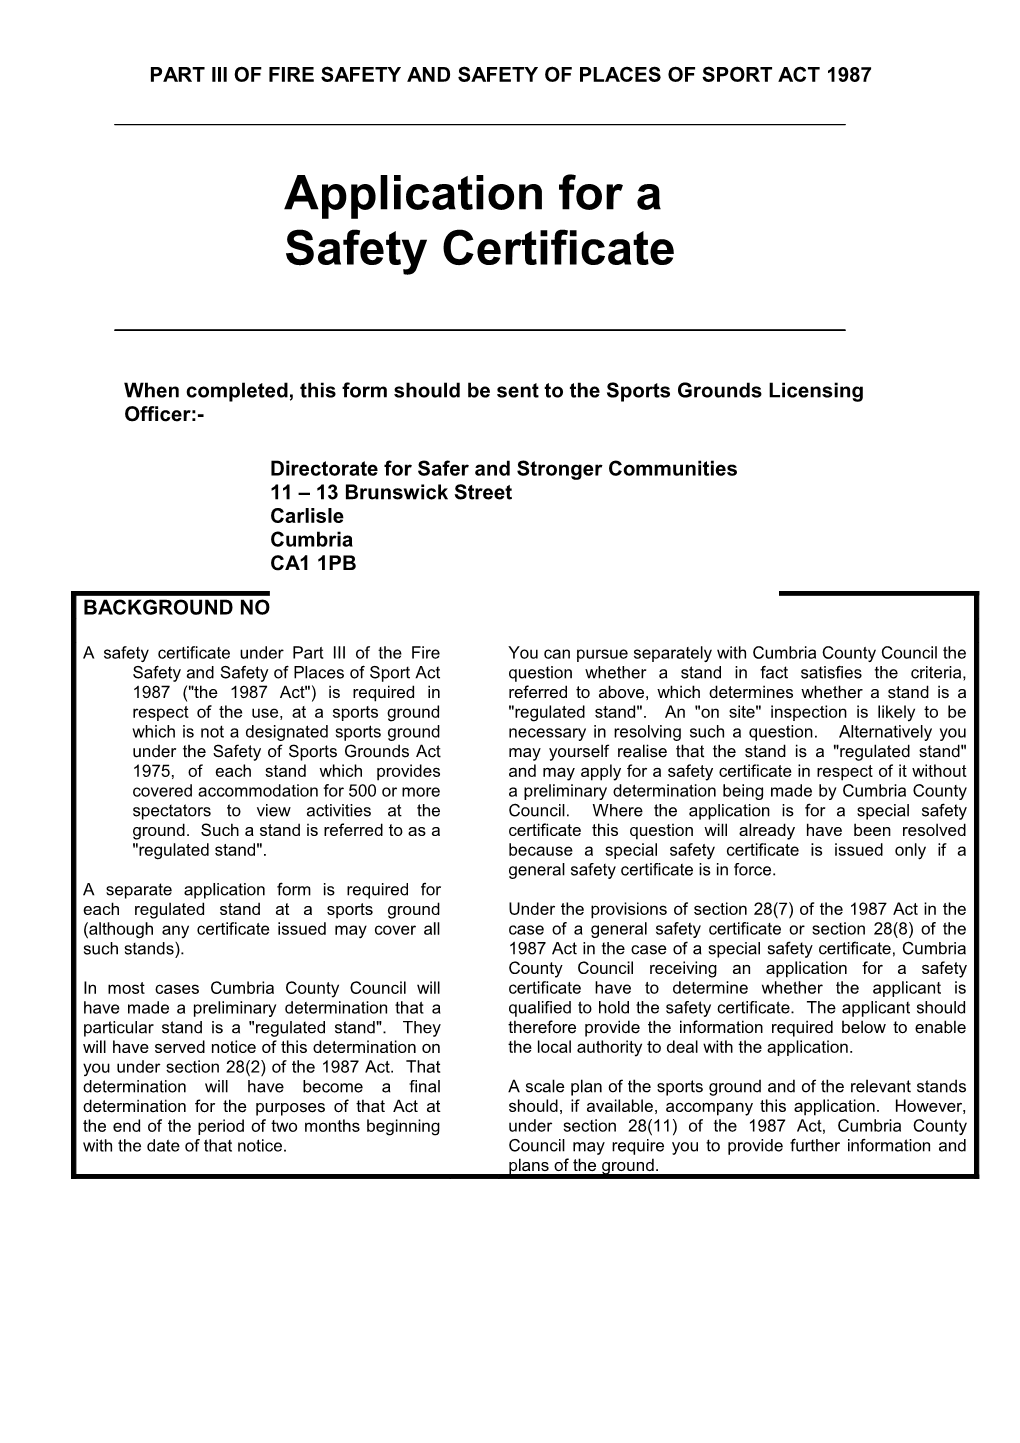 Application for a Safety Certificate for a Regulated Stand